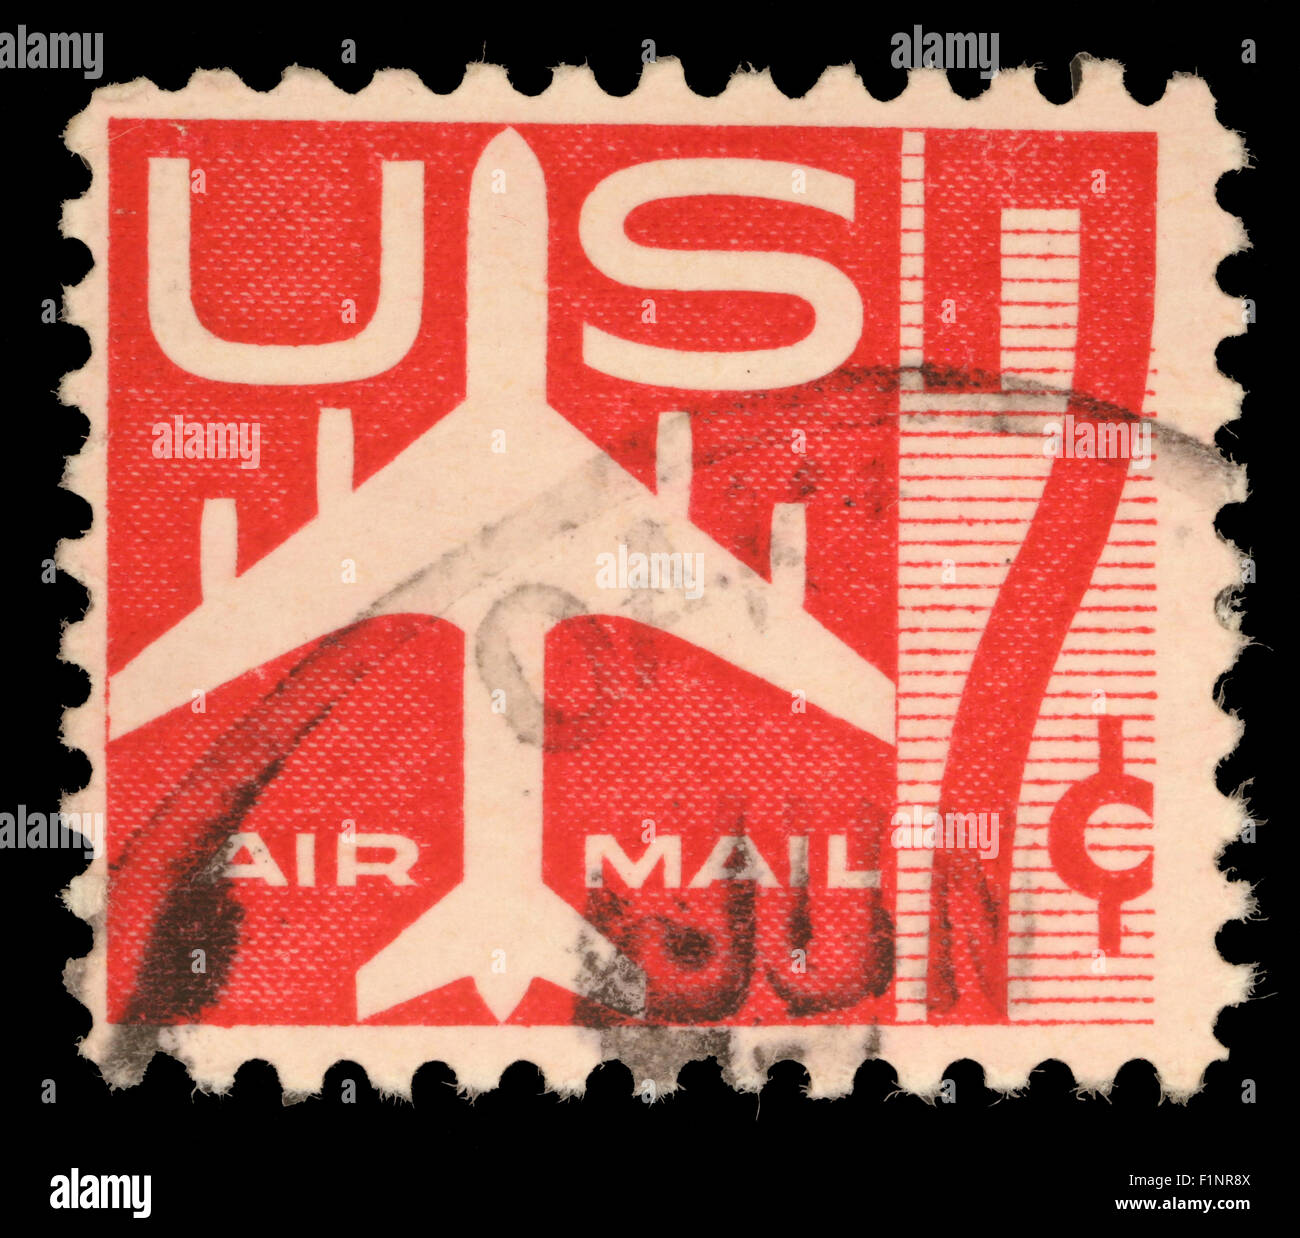 United States postage stamp in the value of 7c used for overseas air mail  deliveries showing air mail symbols Stock Photo - Alamy